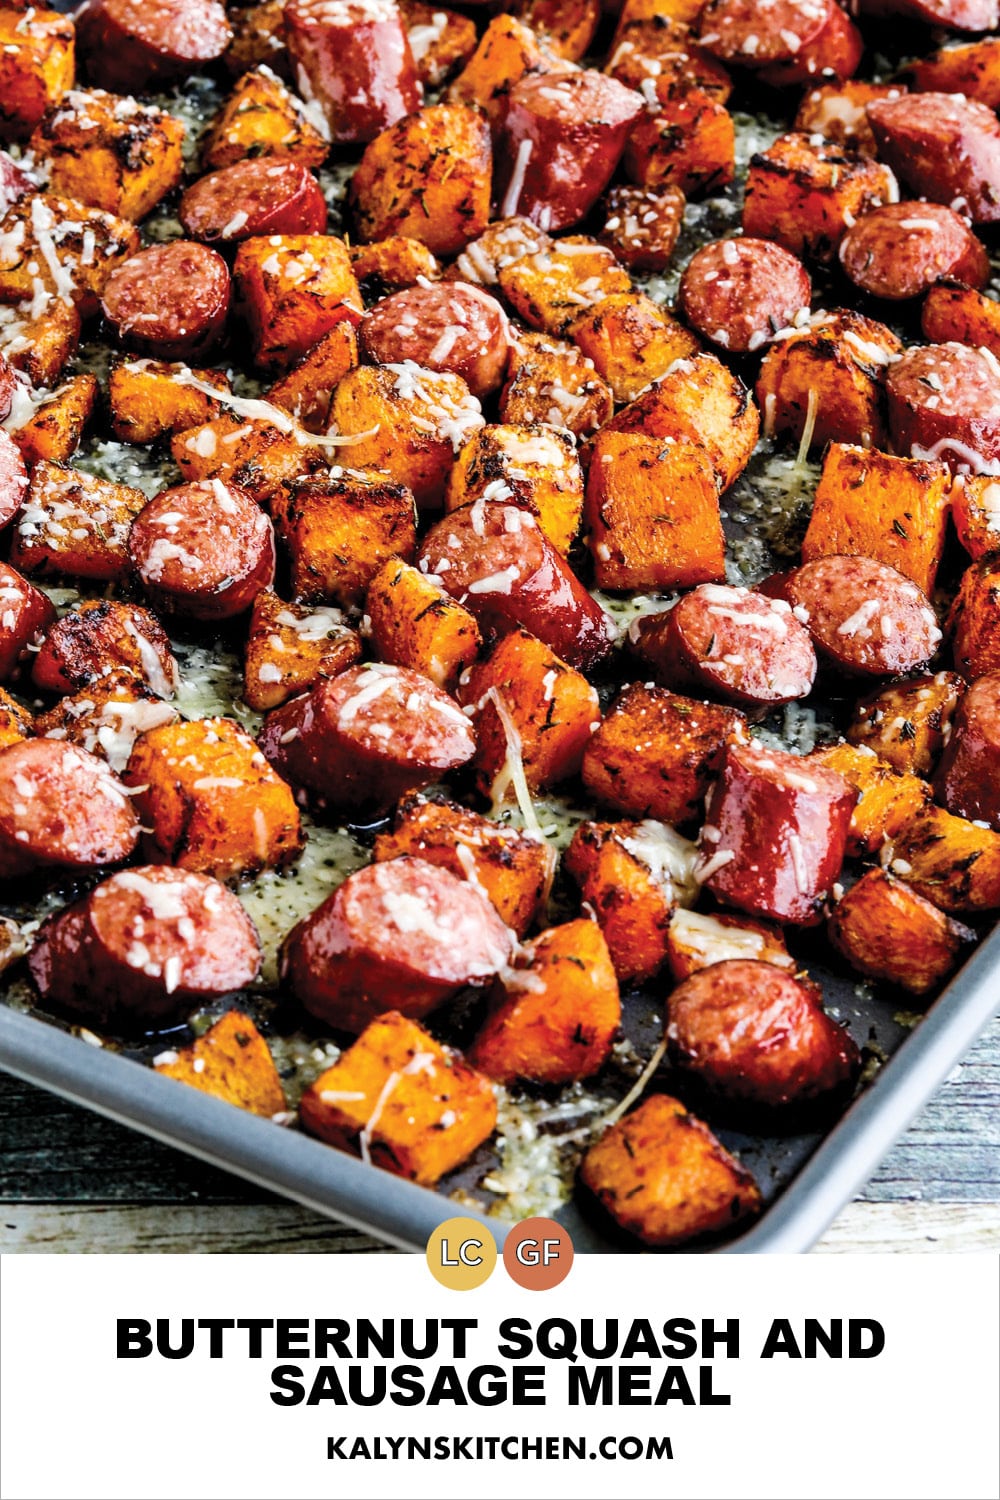 Pinterest image of Butternut Squash and Sausage Meal